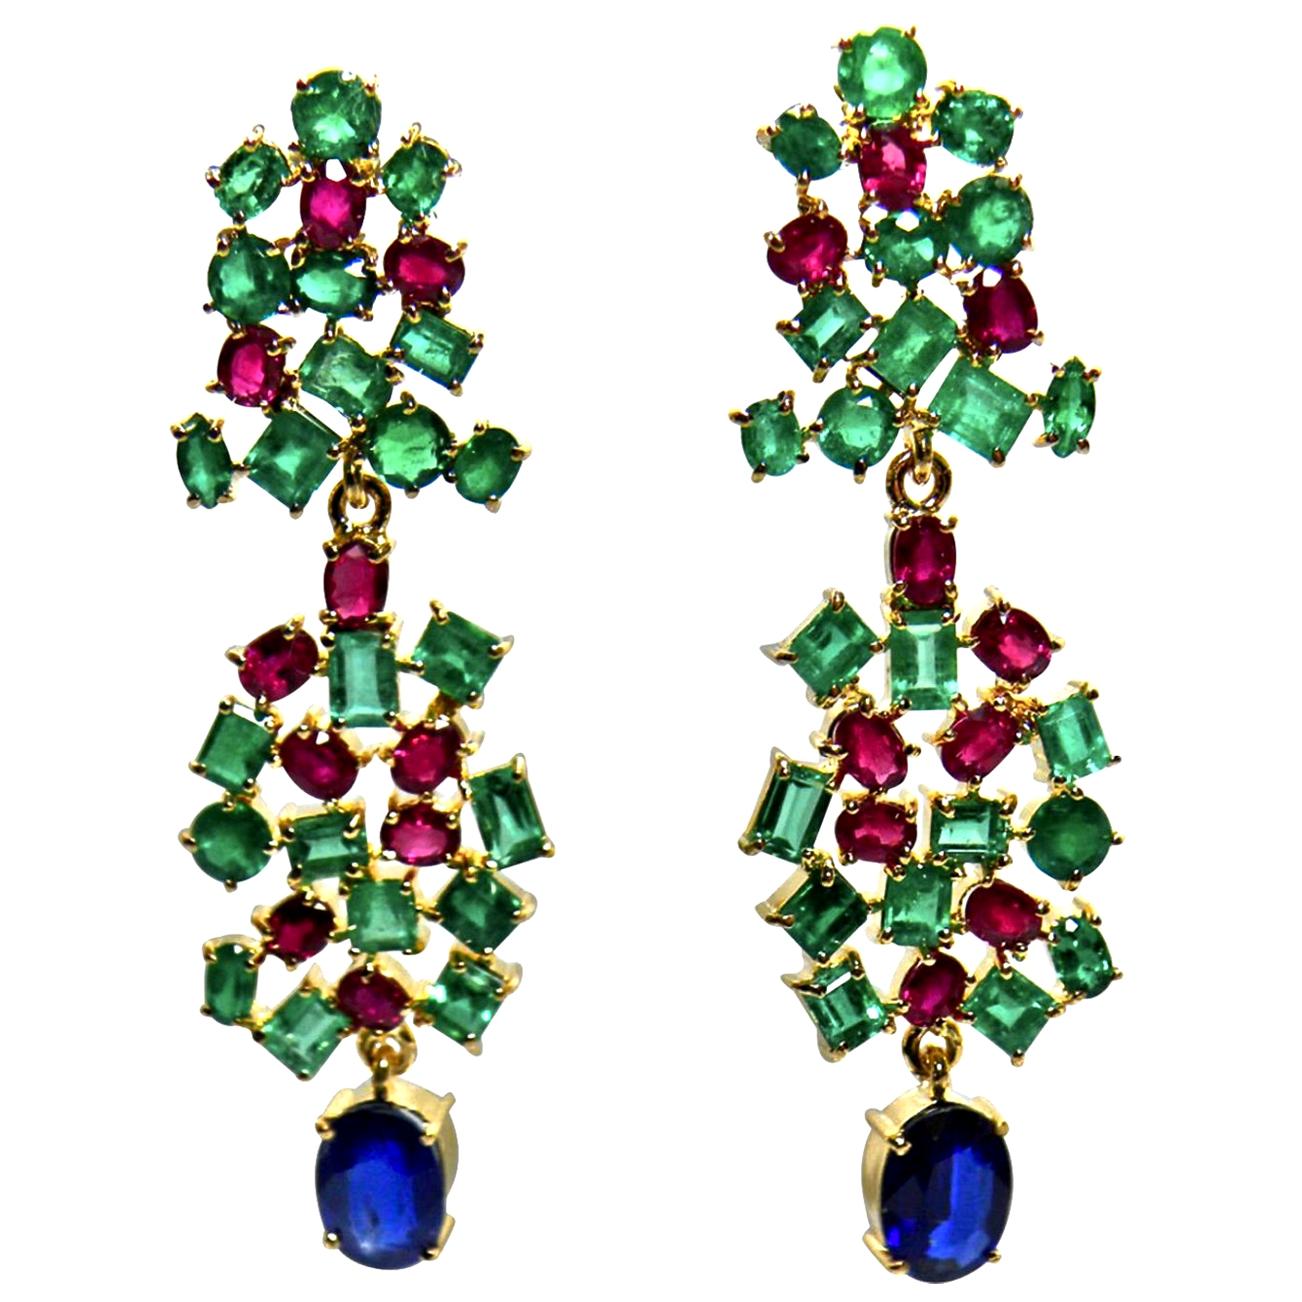  19.36 Carat Sapphire, Emerald, Ruby Chandeliers Earrings One of a Kind  For Sale